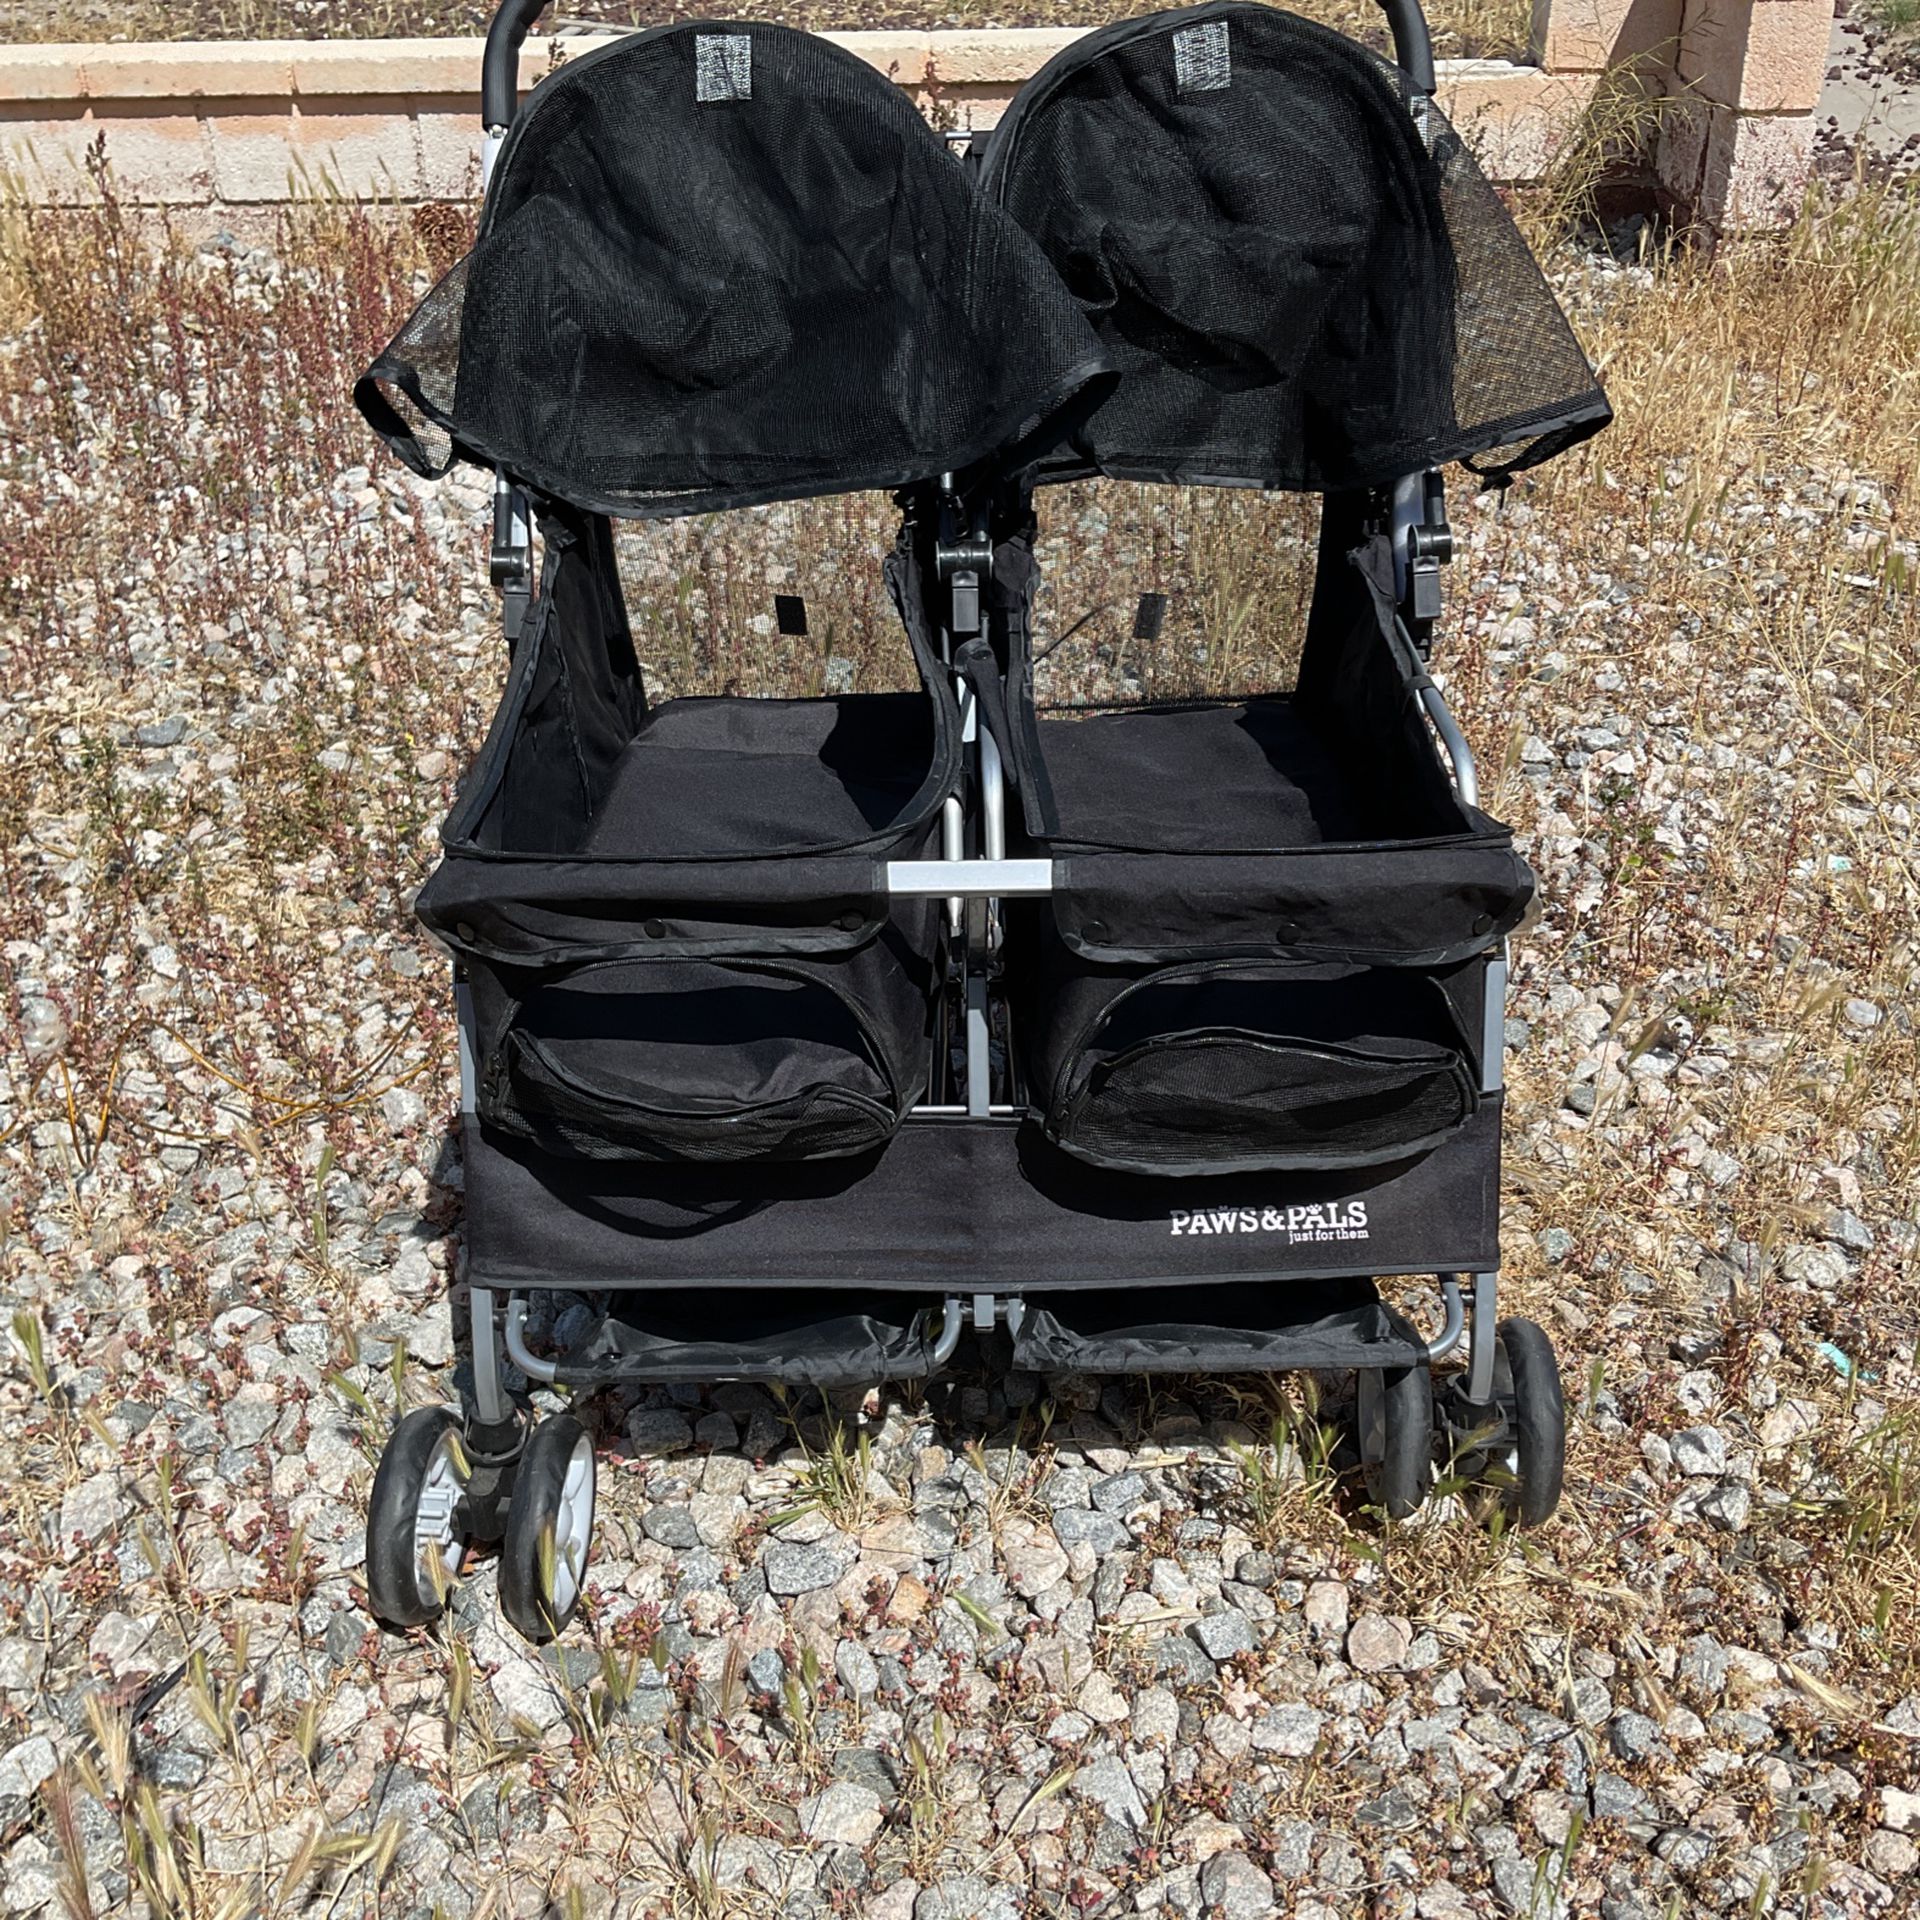 Paws And pals Double Doggy Stroller